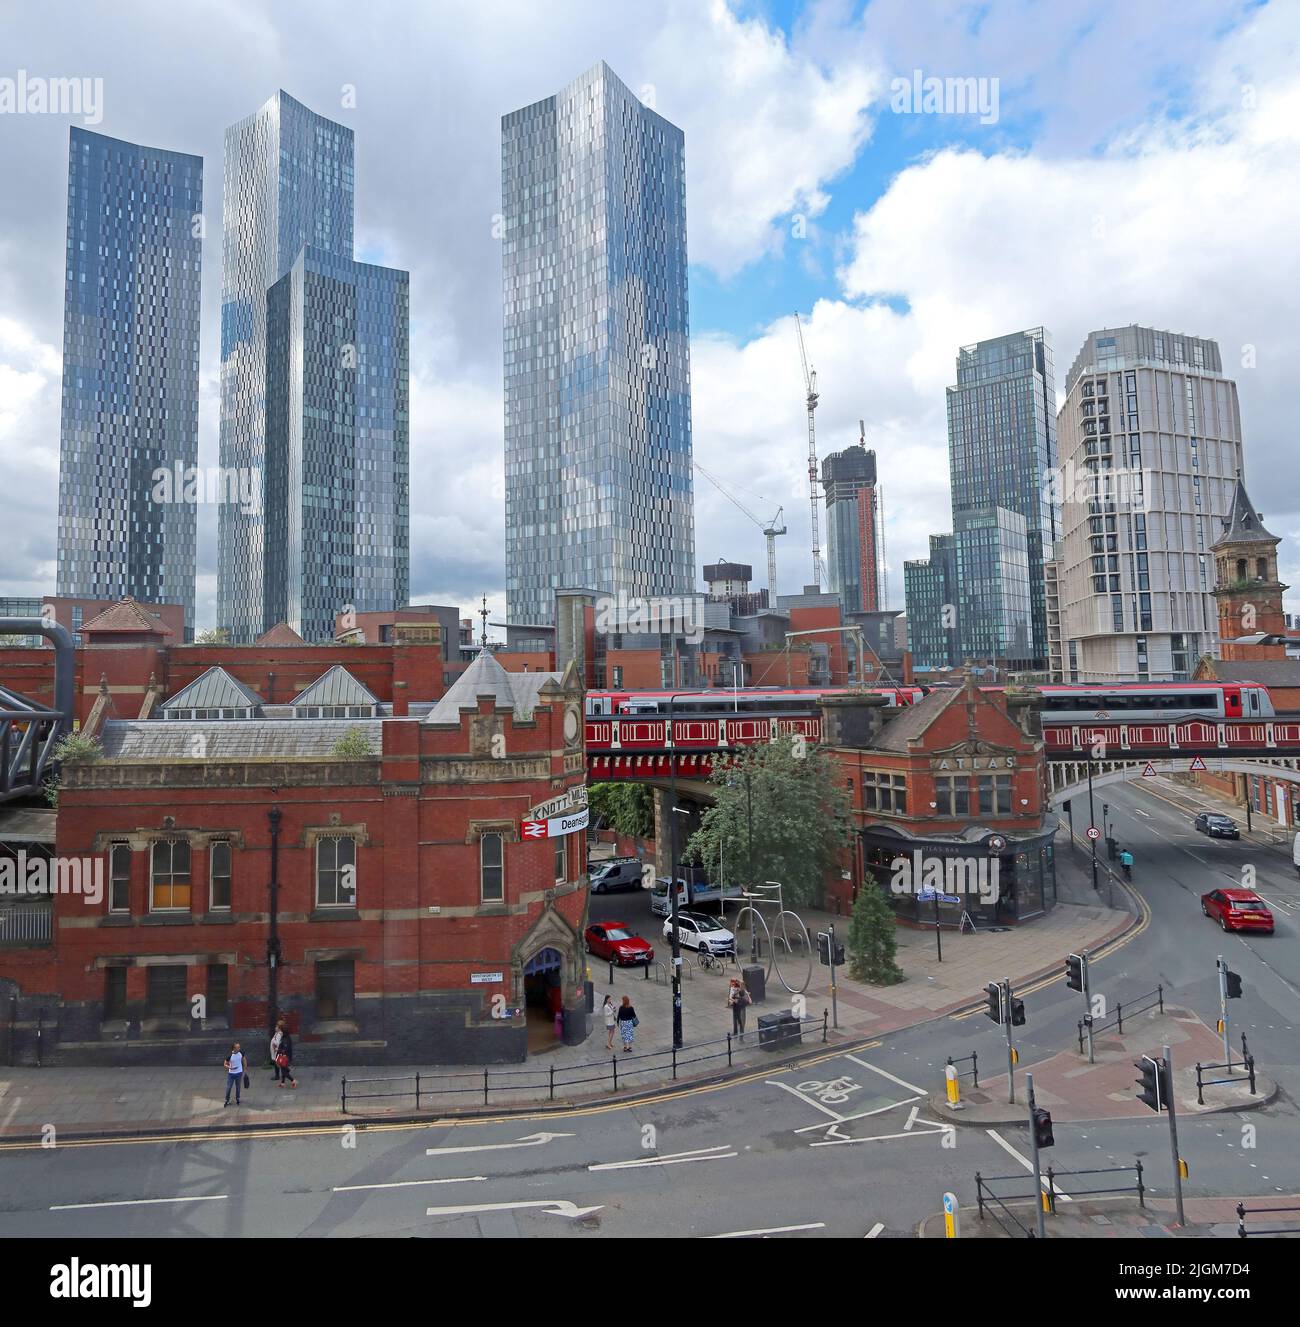 Panorama of Deansgate Castlefield, Manchester, 2 Whitworth St W, Deansgate, Locks, Manchester, England, UK,  M1 5LH Stock Photo